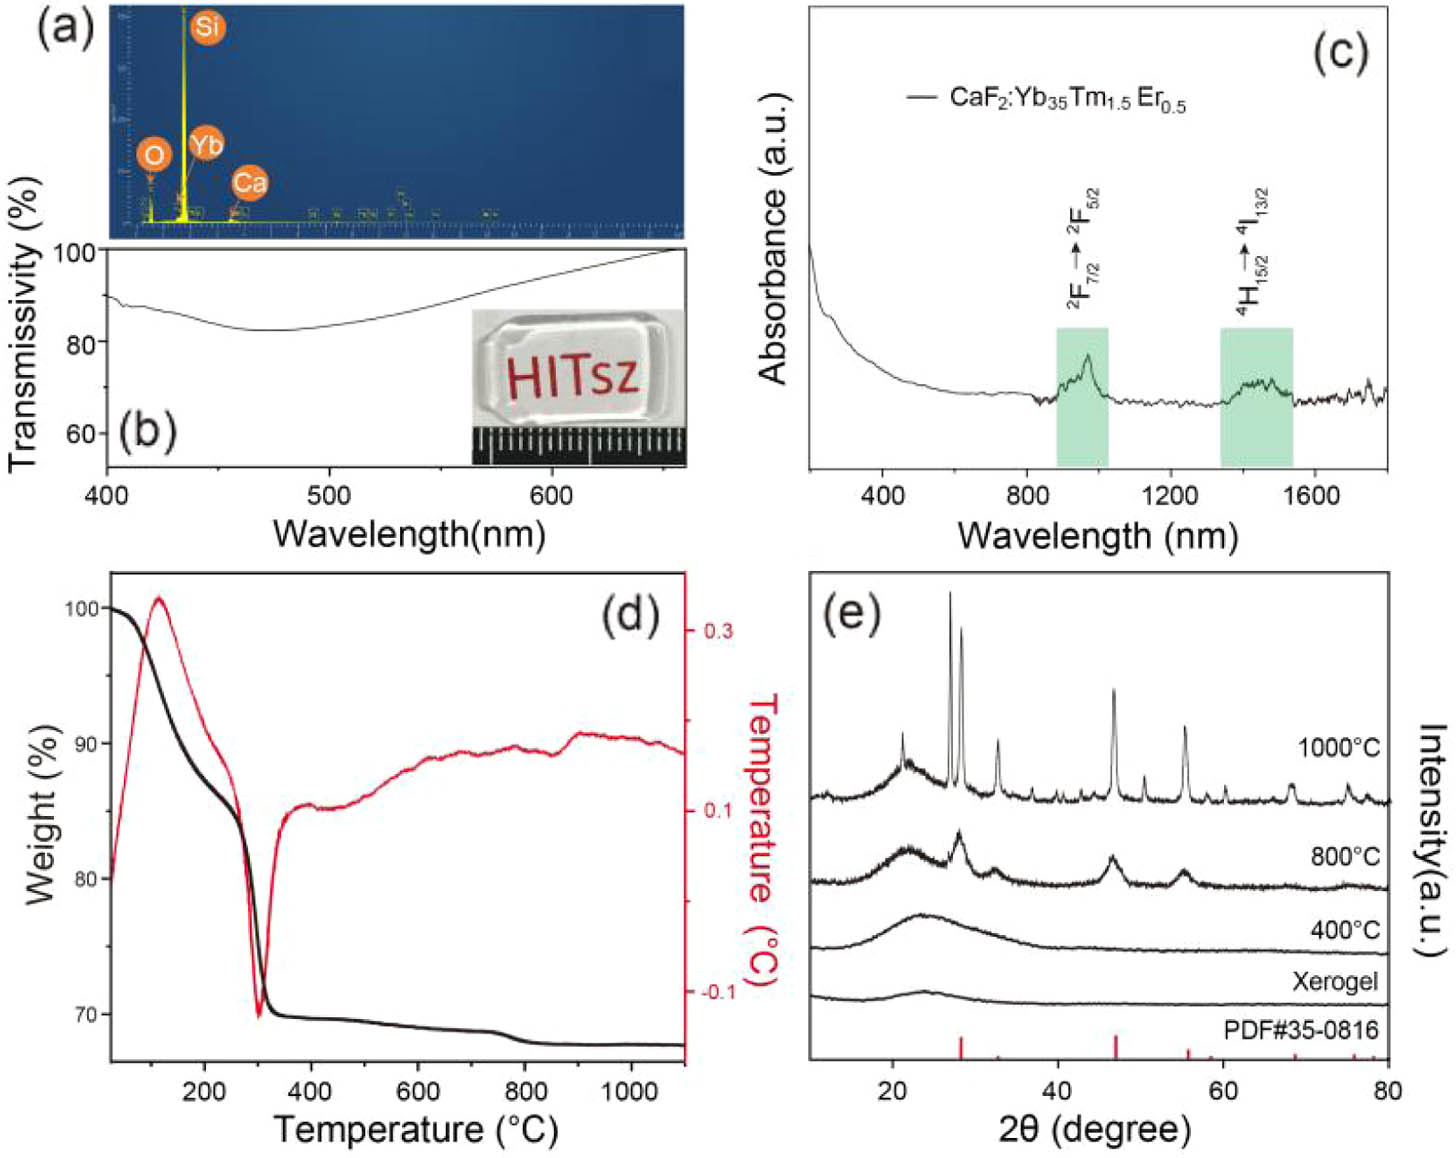 Structural characterization of CaF2:Yb35Tm1.5Er0.5-SiO2 glass films. (a) EDS, (b) transmission, and (c) absorption spectra of the glass film obtained from the optimized conditions. The inset in (b) shows the optical image of the corresponding bulk glass. (d) TG/DTA curves for the xerogel treated in air. (e) XRD patterns of the xerogels treated at different temperatures.